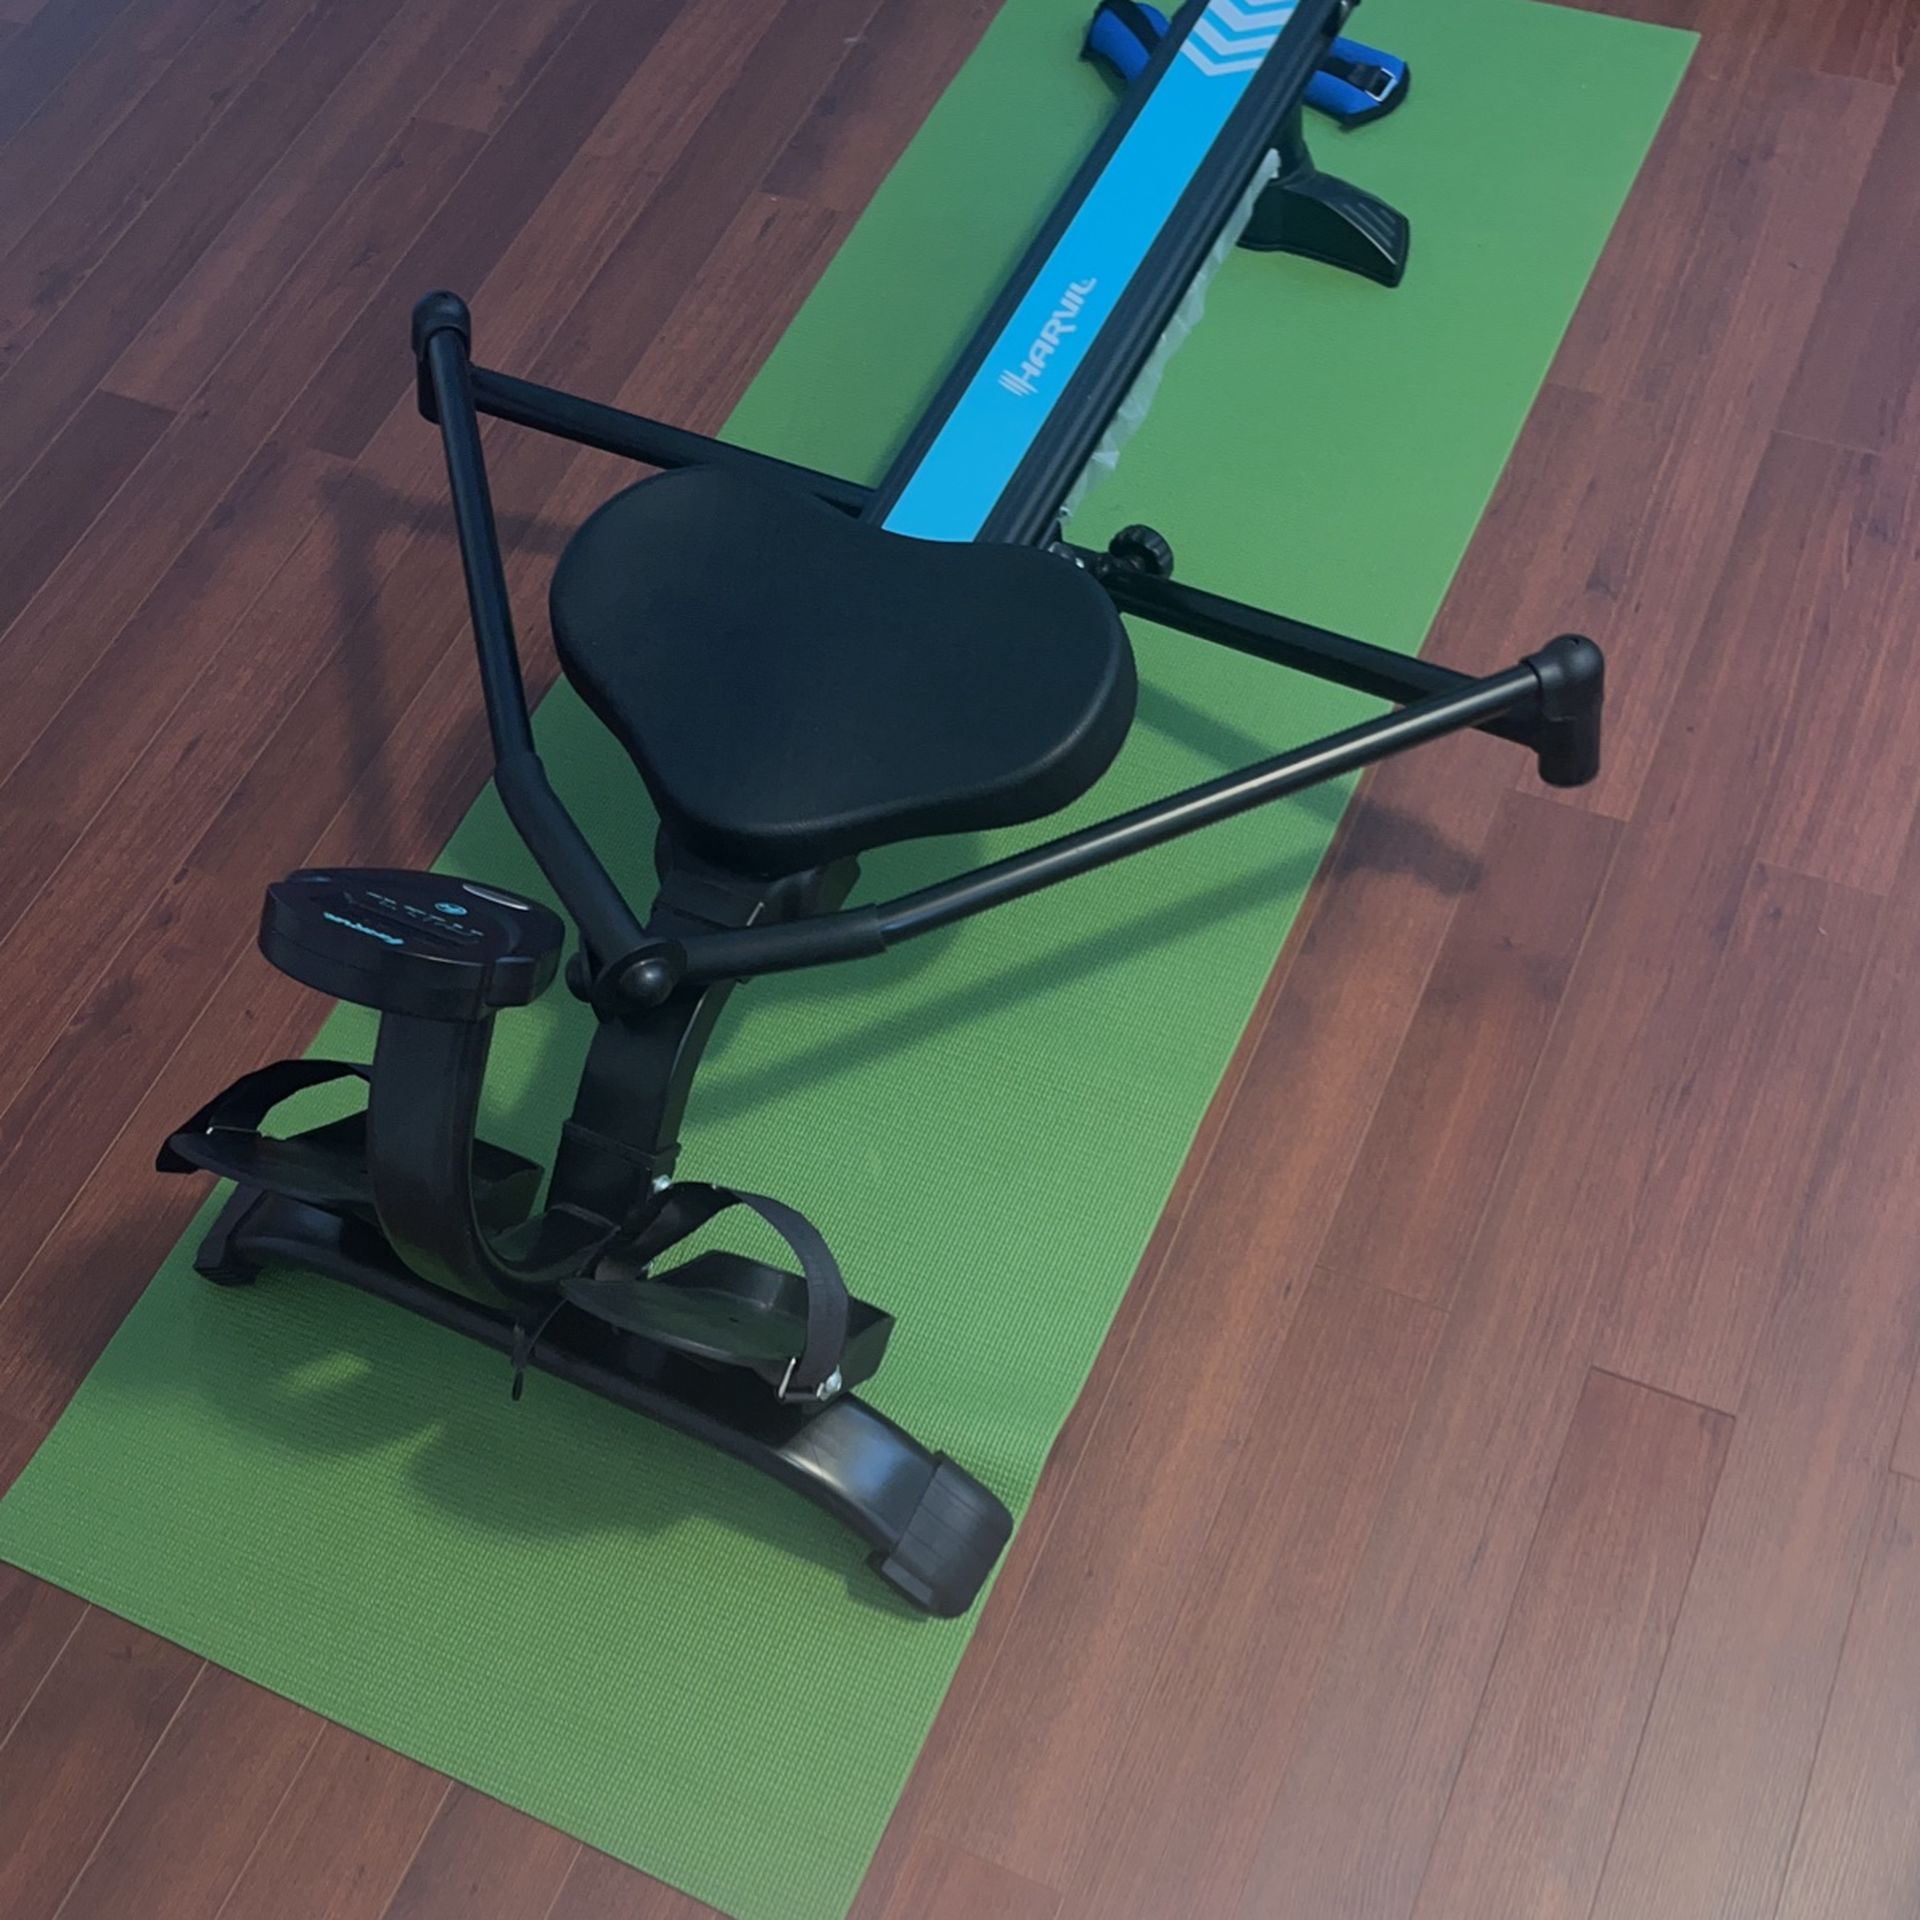 Harvil Rowing Machine never used (willing to trade also)